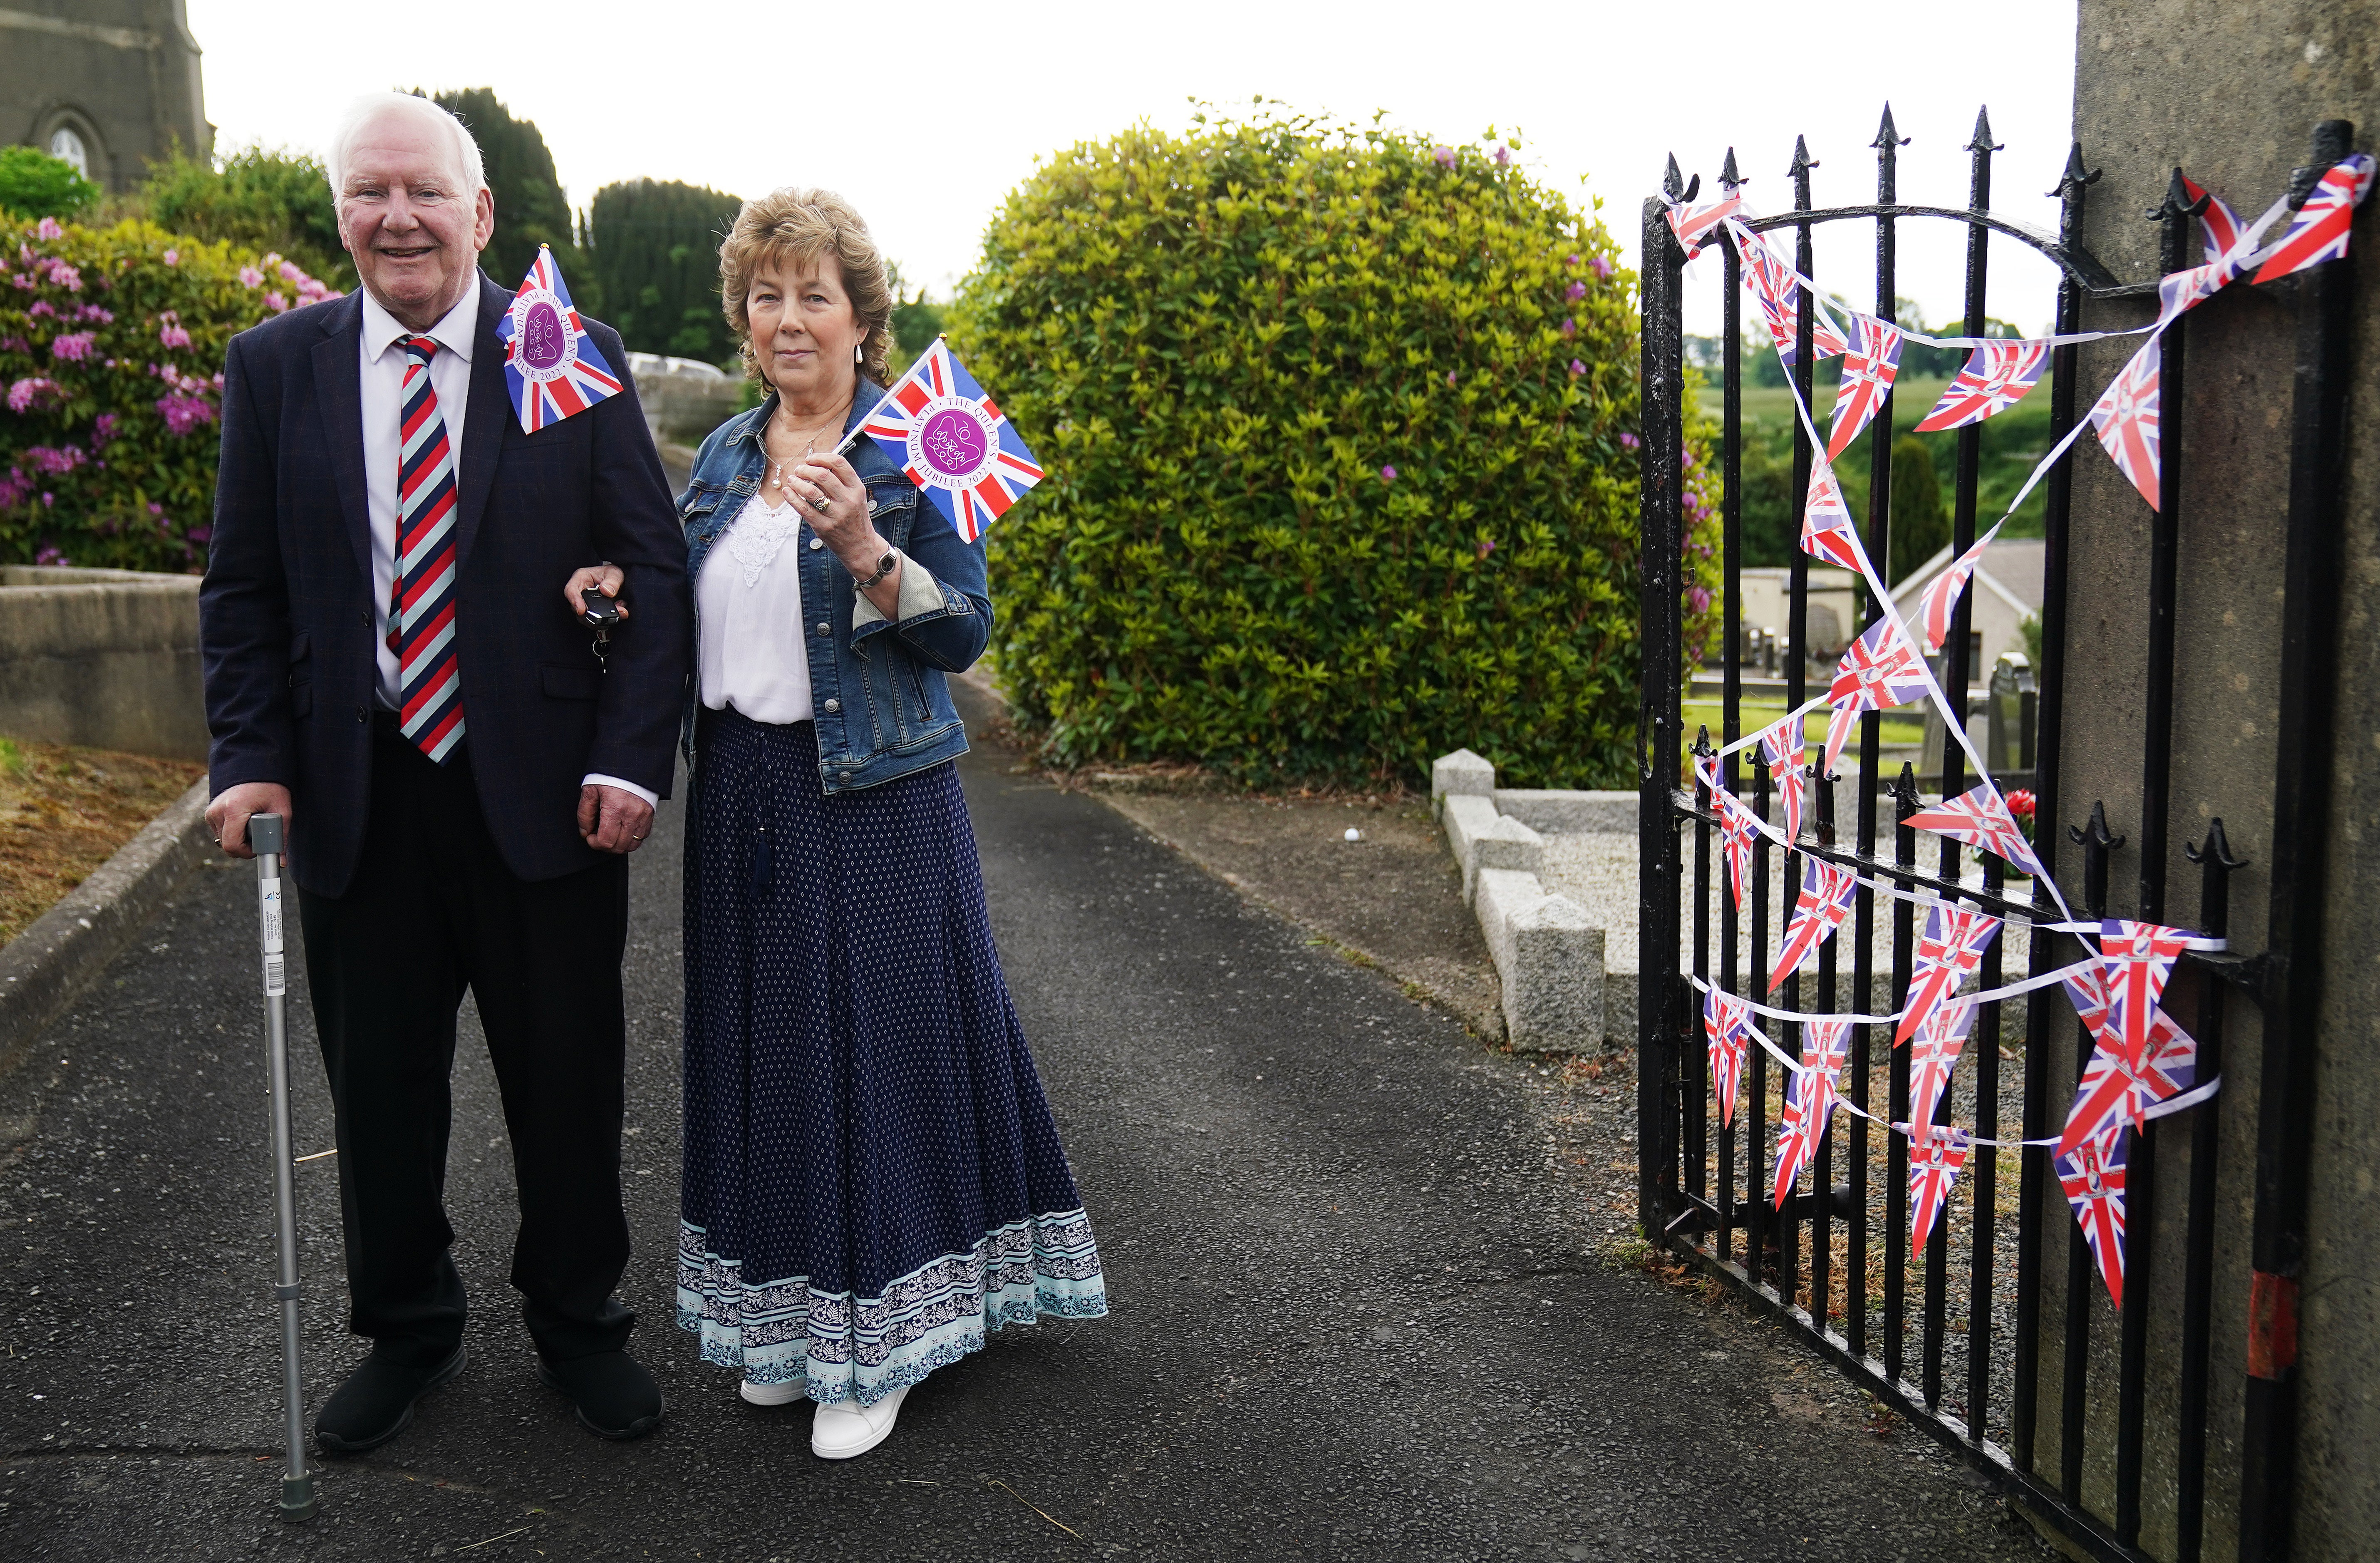 George McGaffin and his wife Lorna attend a picnic at St Bartholomew’s Parish Church, Newry, as part of the Big Jubilee Lunch (Brian Lawless/PA)